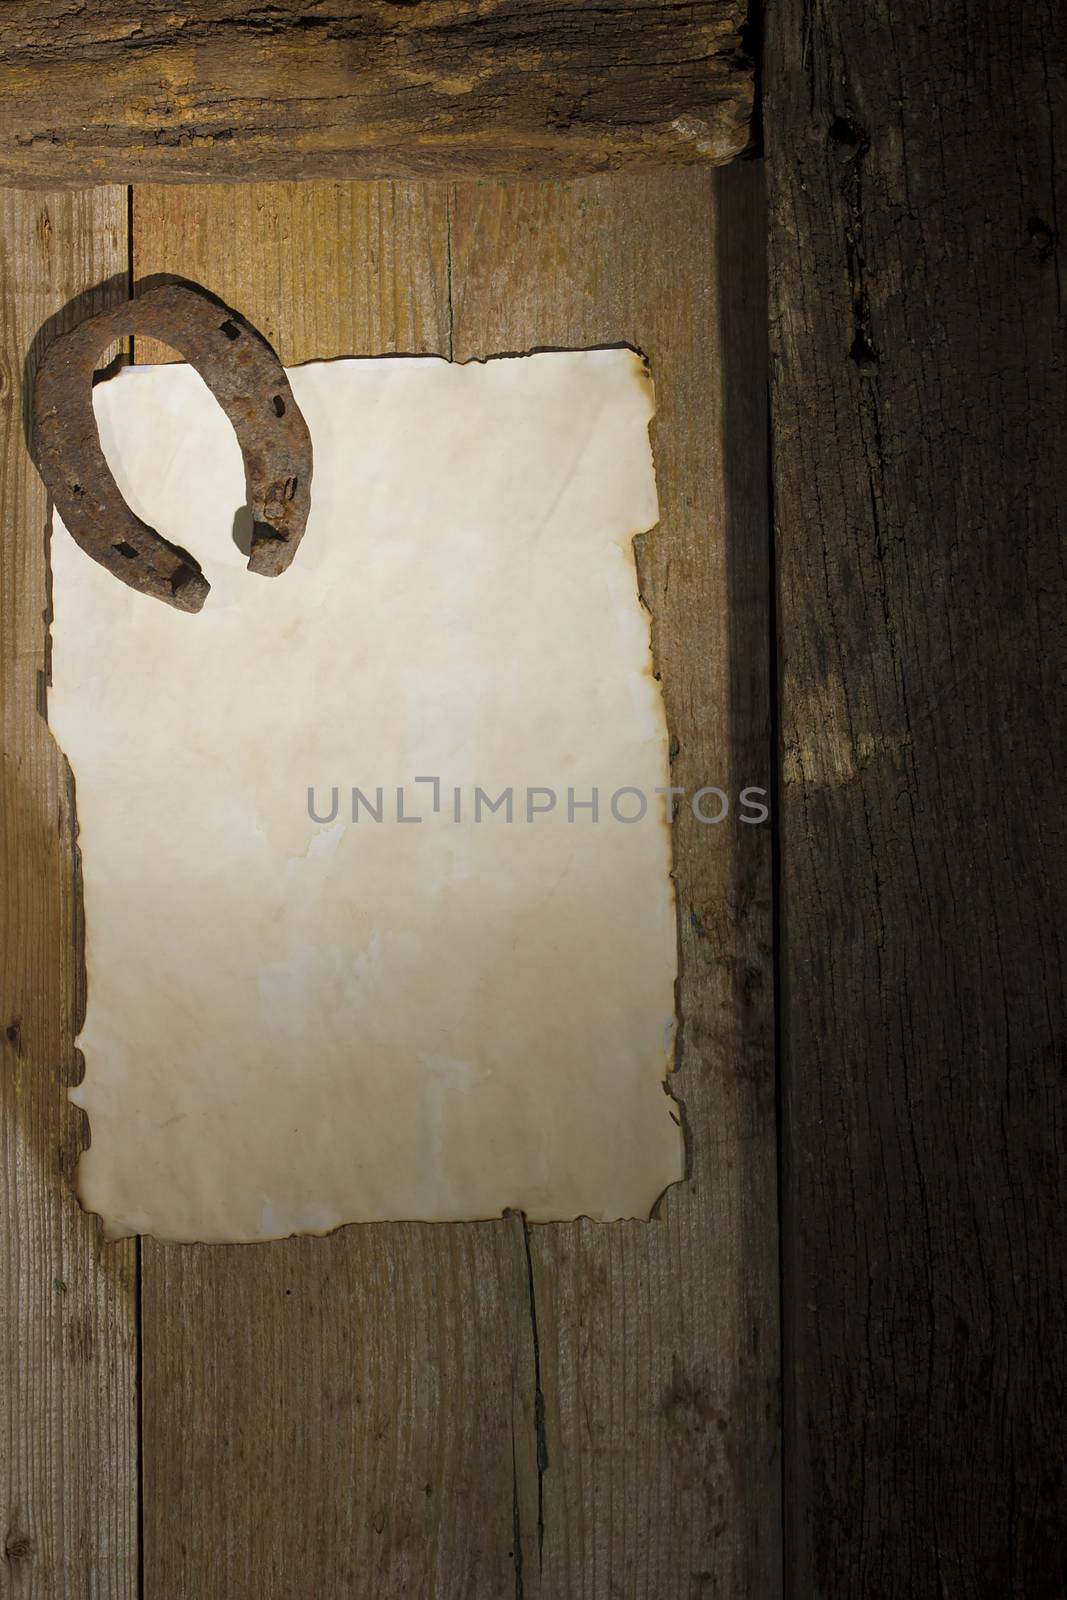 Rusty horseshoe and a sheet of paper on an antique door